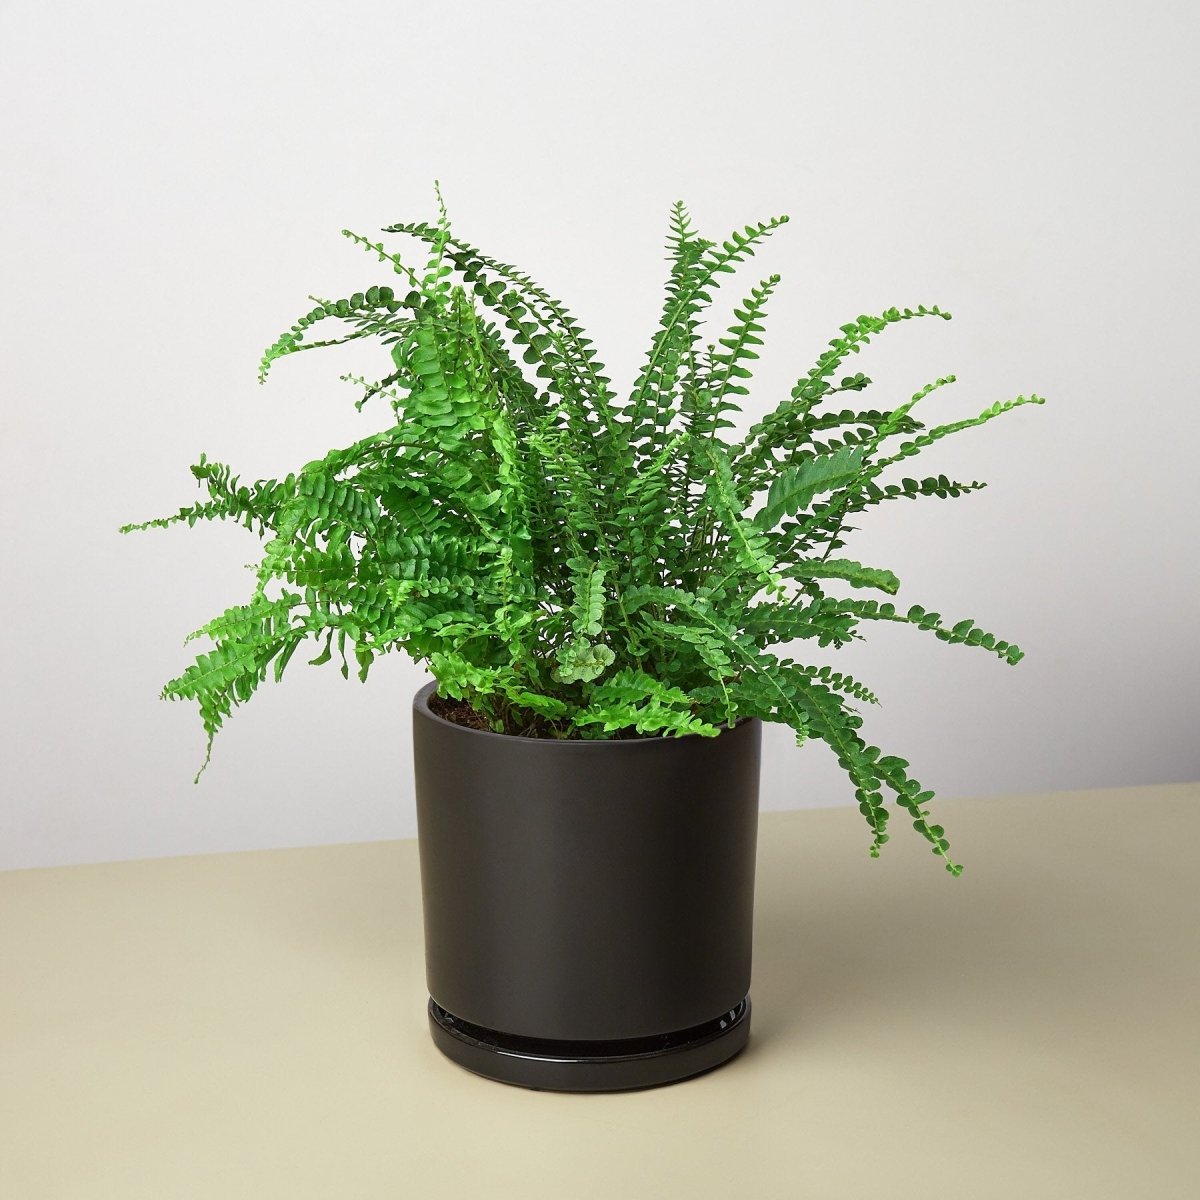 lily & onyx Pre-Potted Ferns Gift Arrangement - lily & onyx